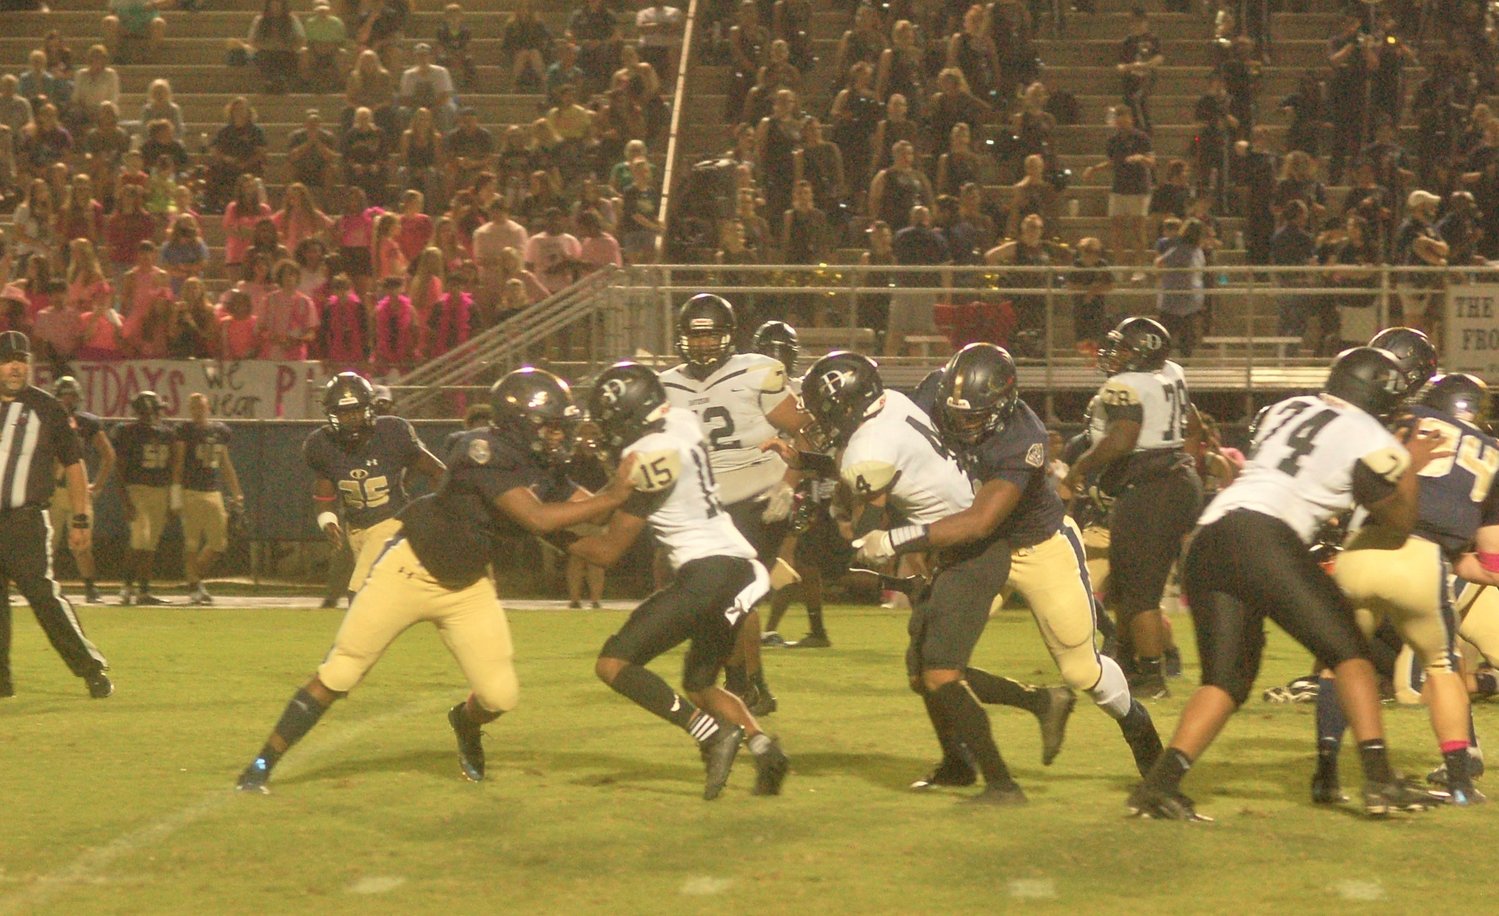 The Lions defense helped Foley secure the Region 1 win at home on Hall of Fame Night.